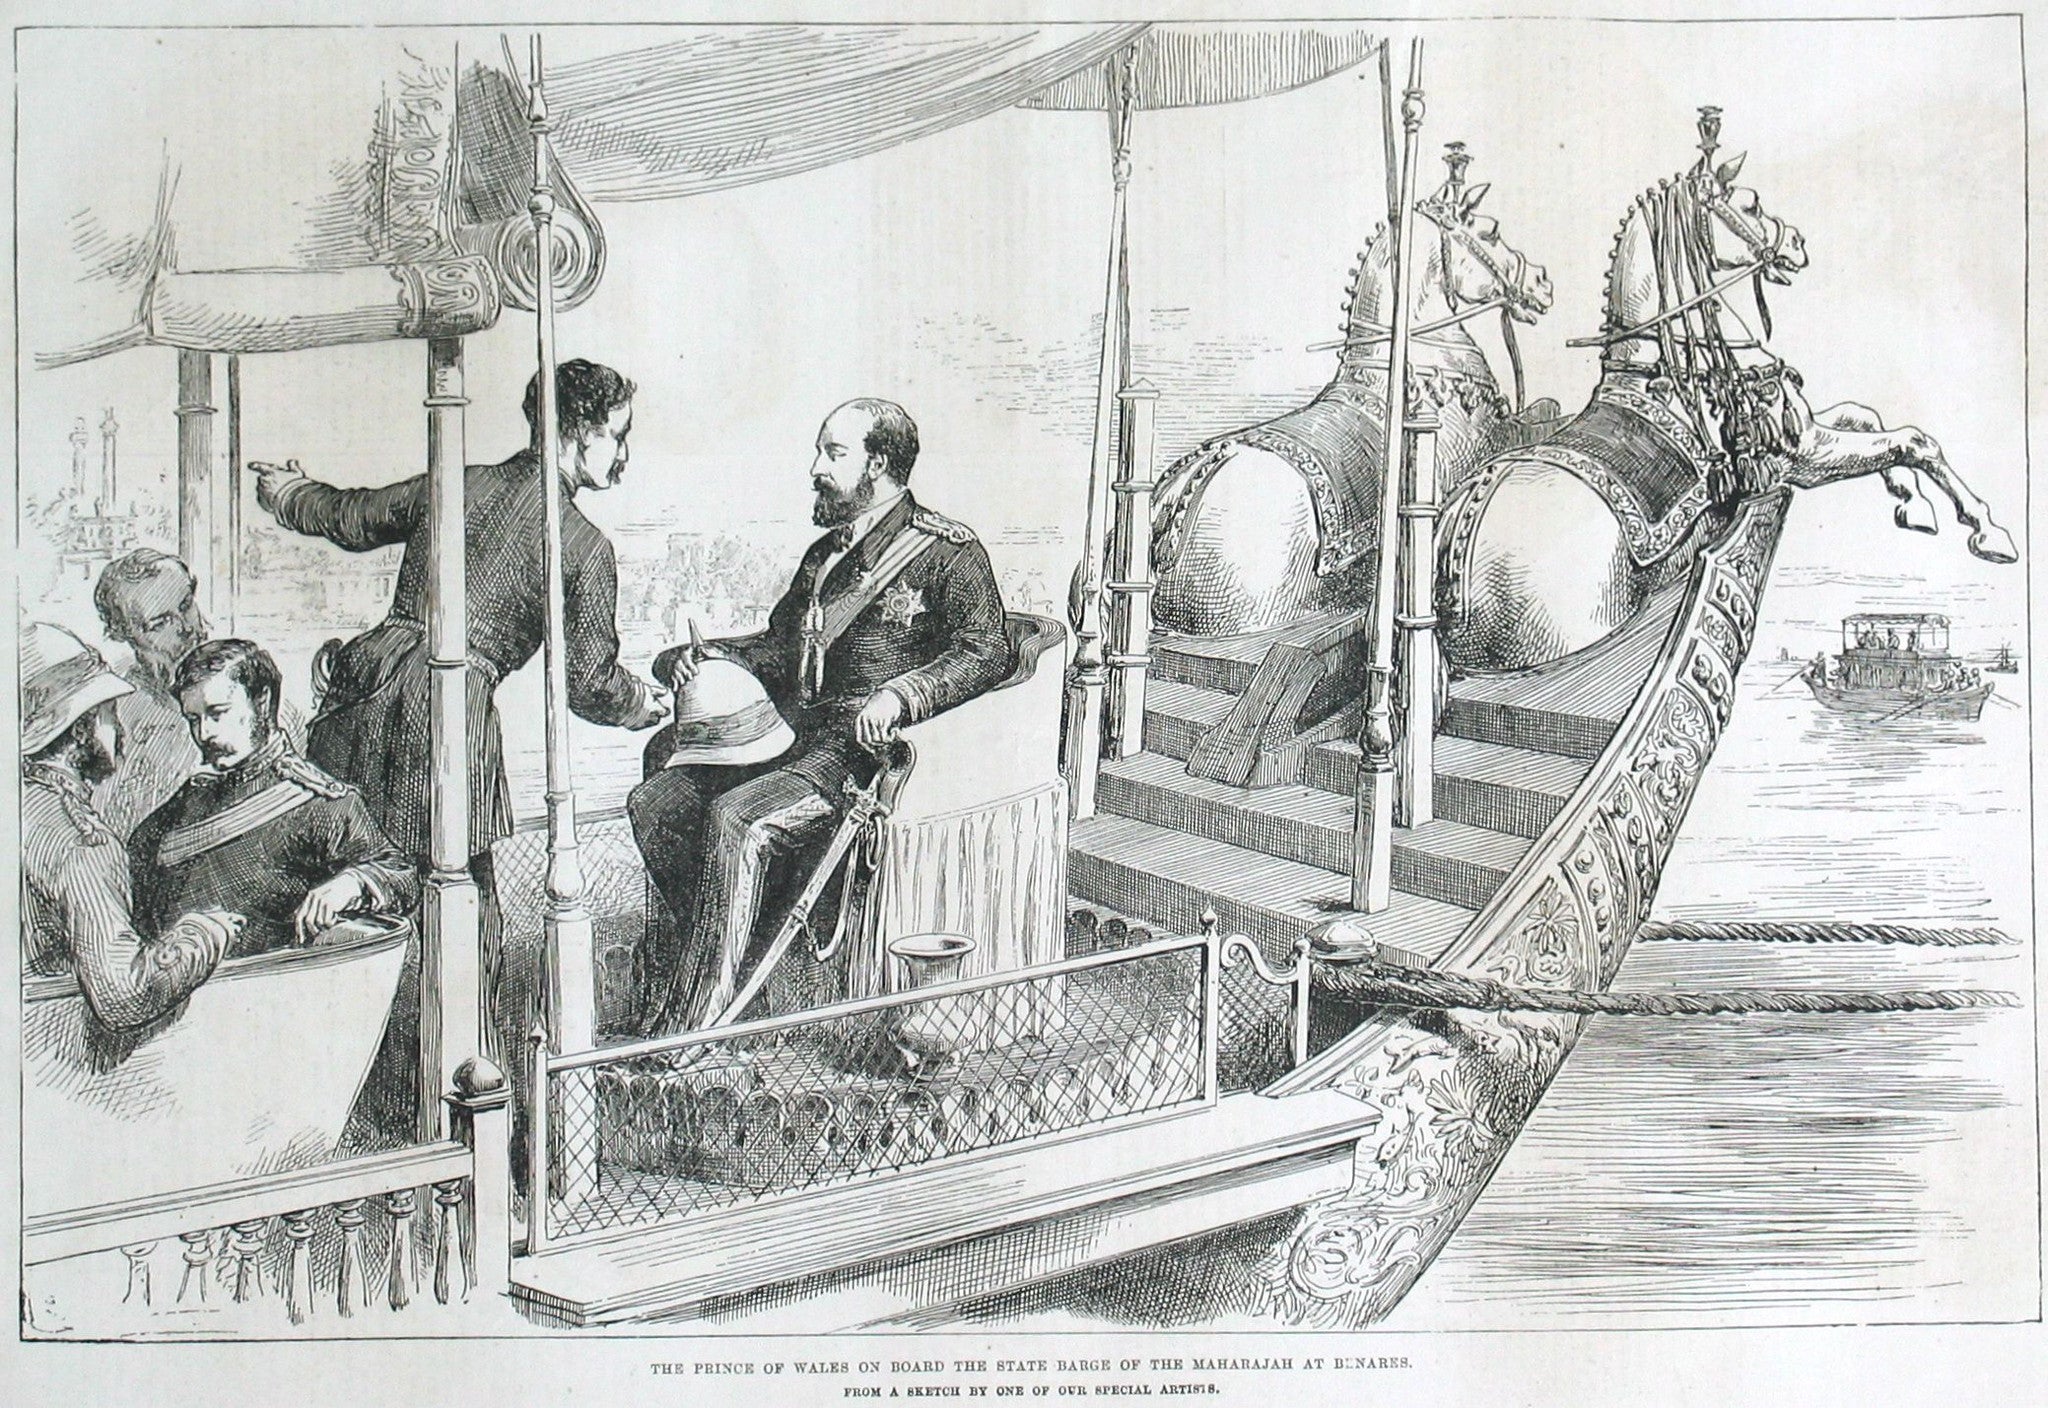 The Prince of Wales on board the state barge of the Maharajah at Benares.